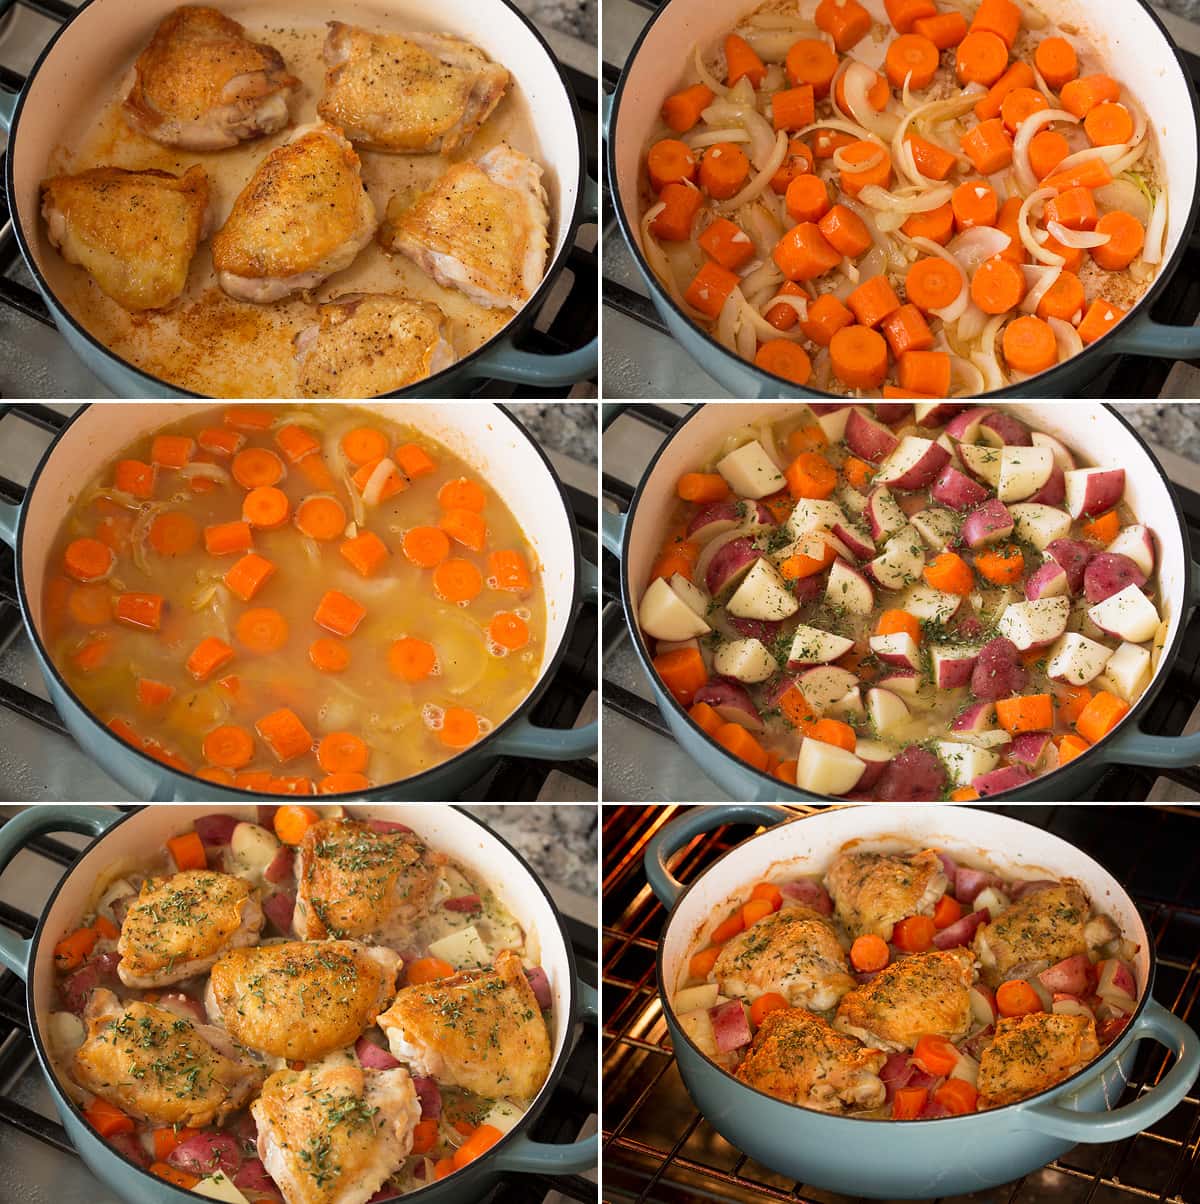 Six photos together showing steps of making braised chicken thighs with potatoes and carrots.